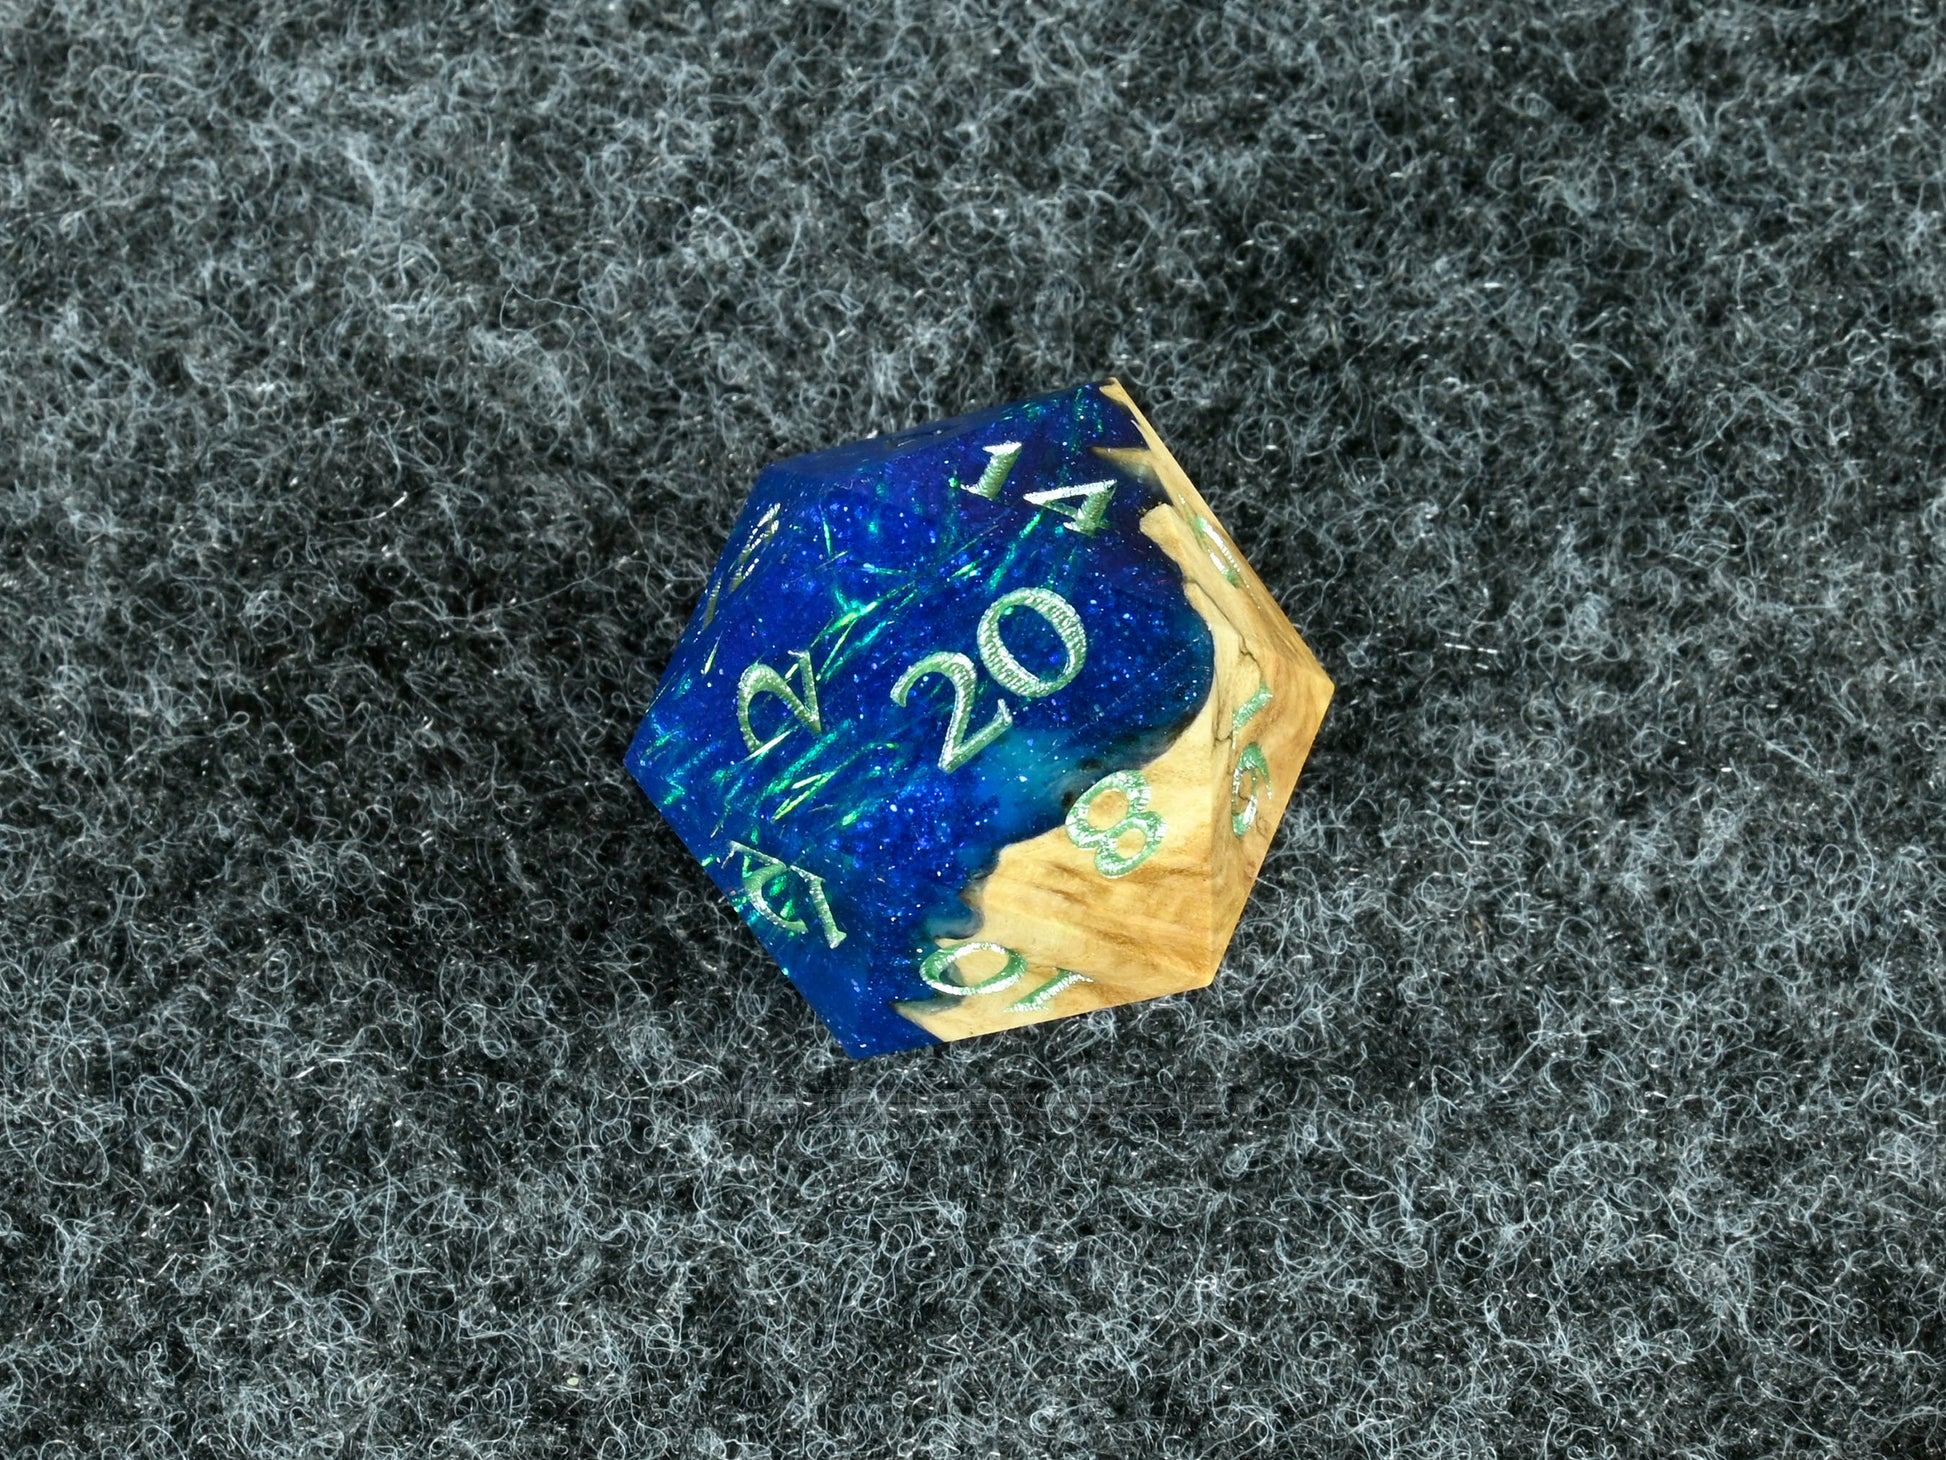 firefly bay brown mallee burl wood and resin d20 for dnd ttrpg